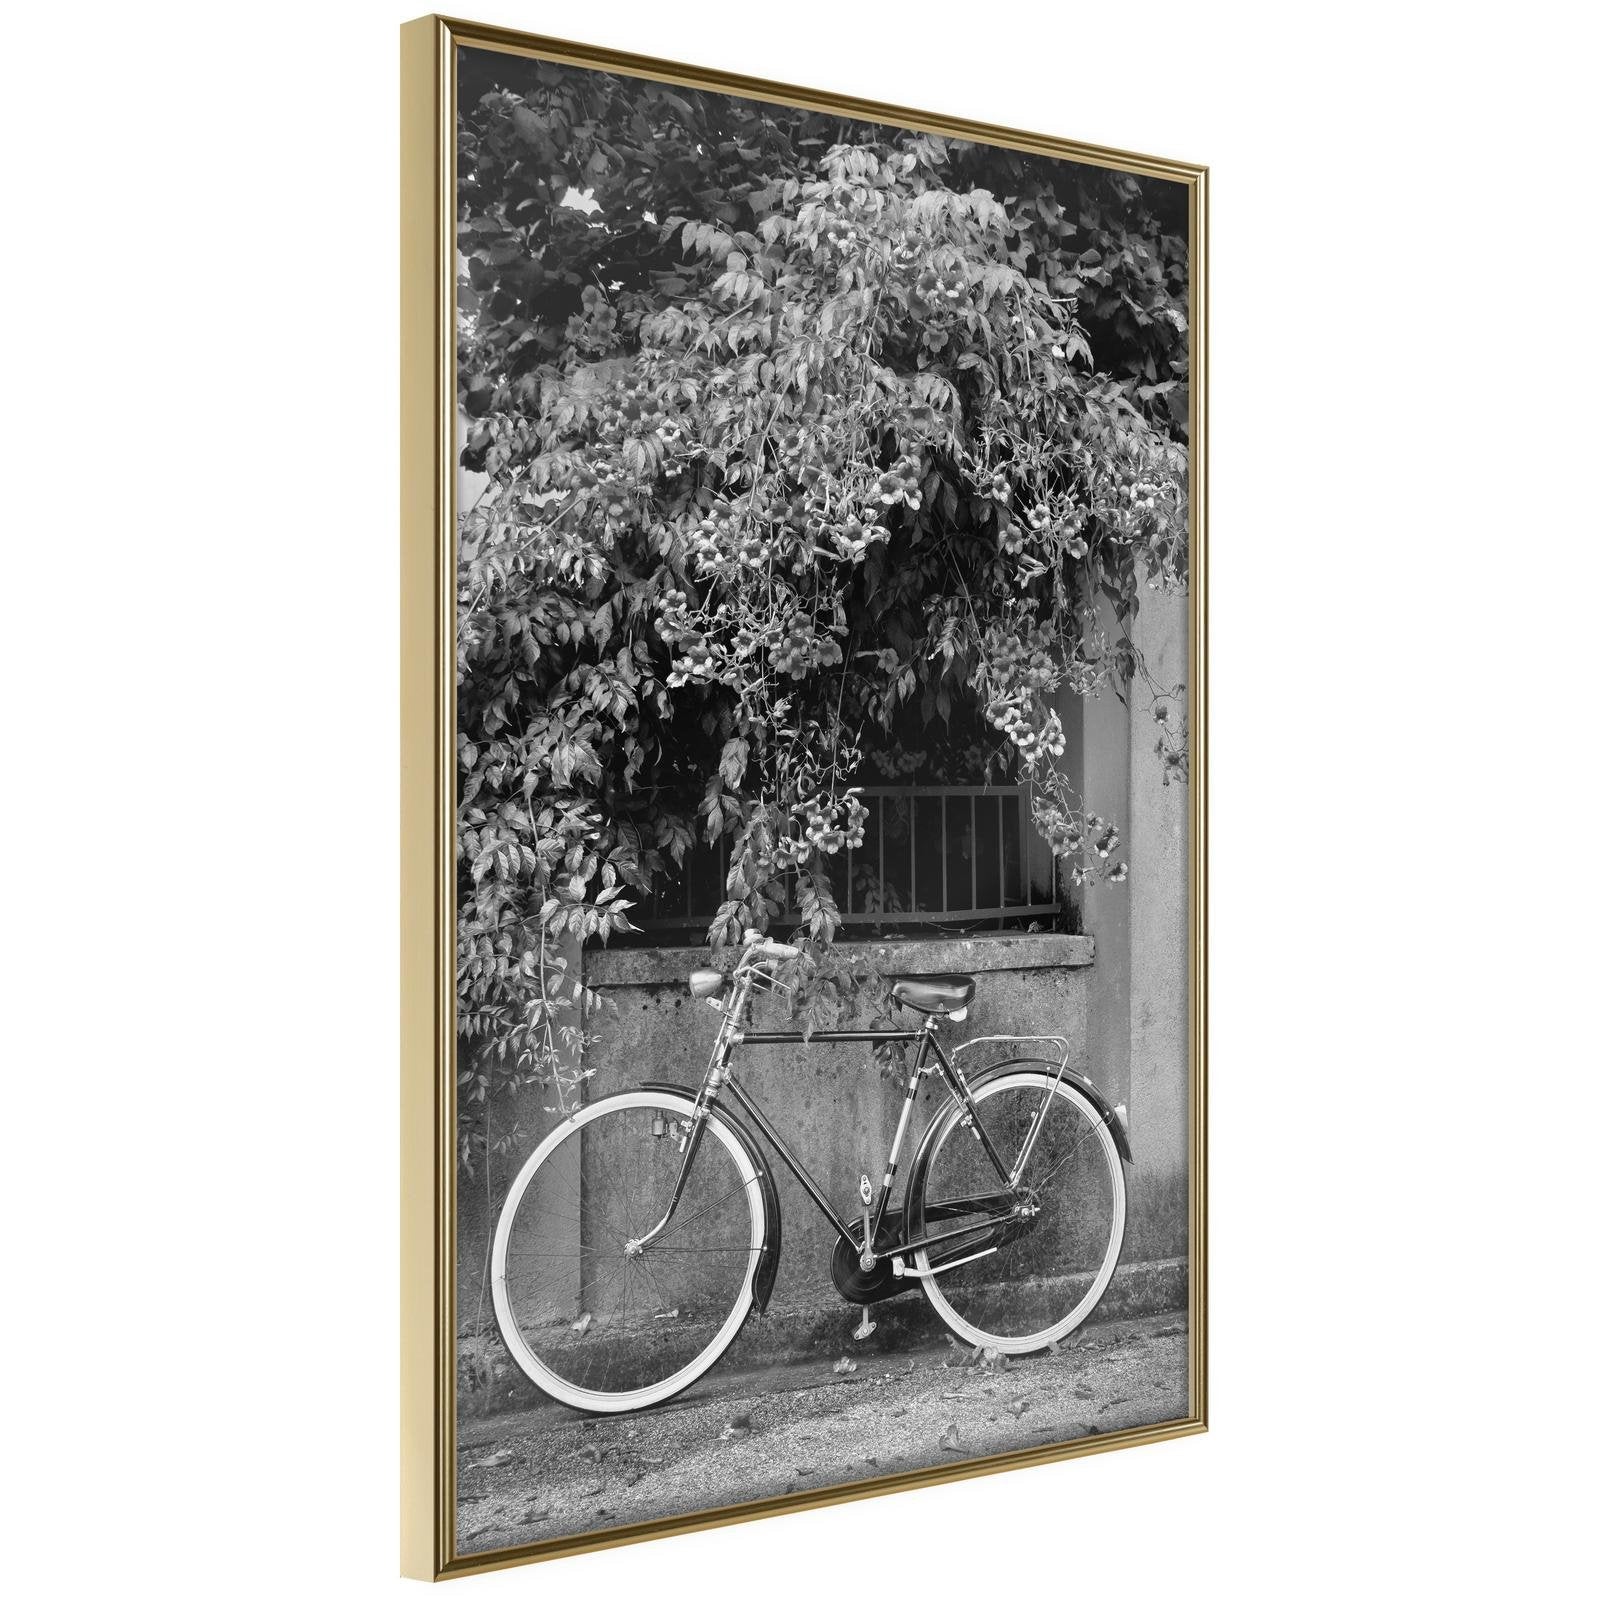 Inramad Poster / Tavla - Bicycle with White Tires-Poster Inramad-Artgeist-20x30-Guldram-peaceofhome.se